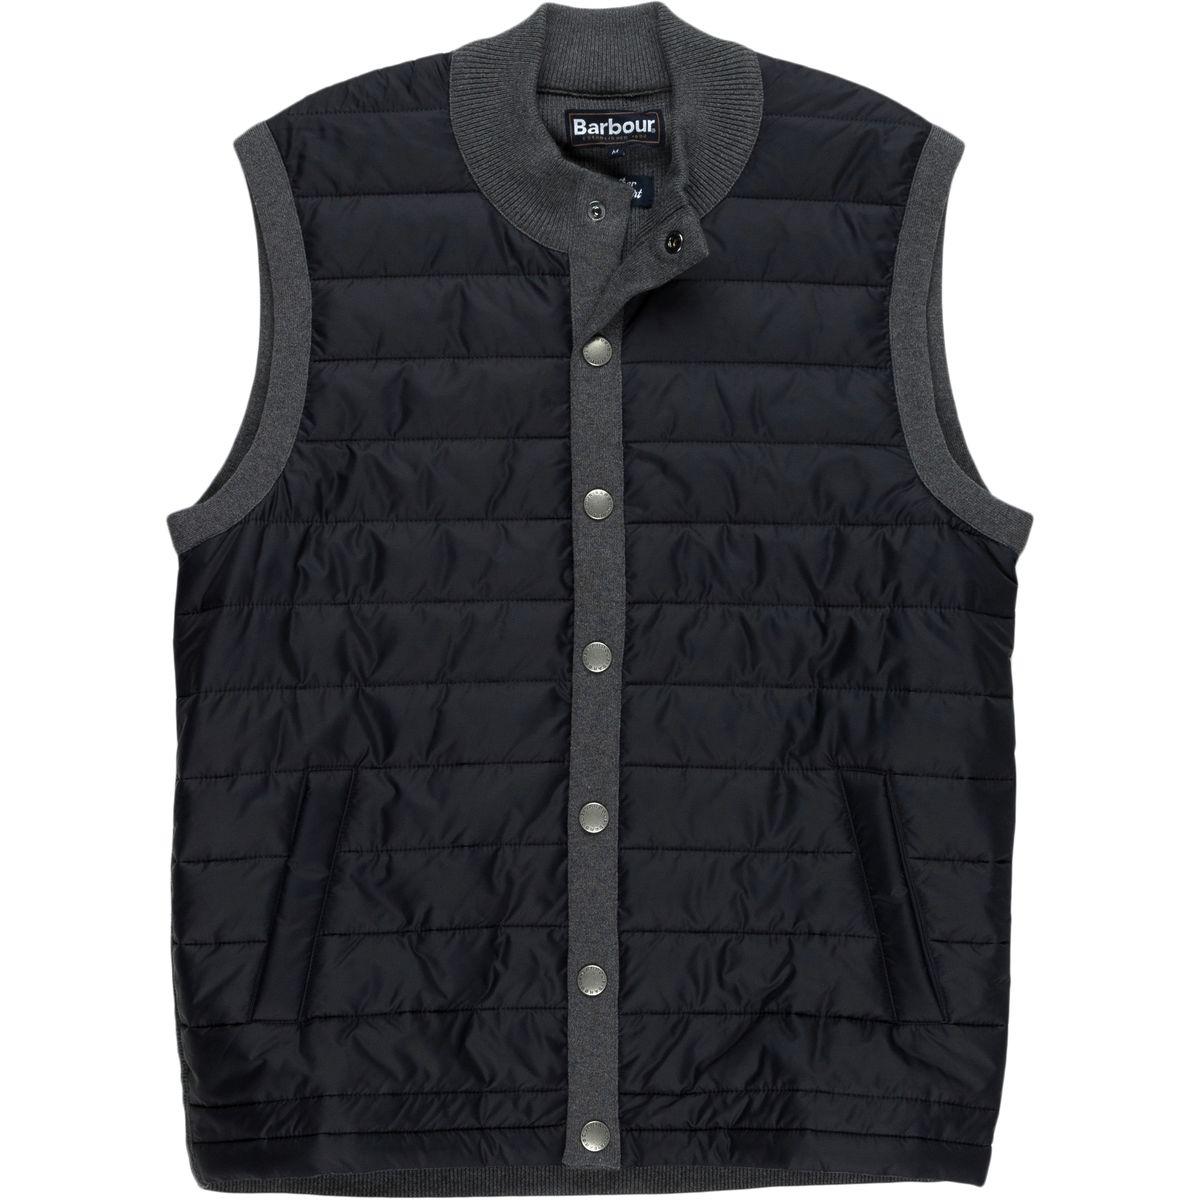 Barbour Synthetic Essential Gilet Vest in Mid Grey (Gray) for Men - Lyst